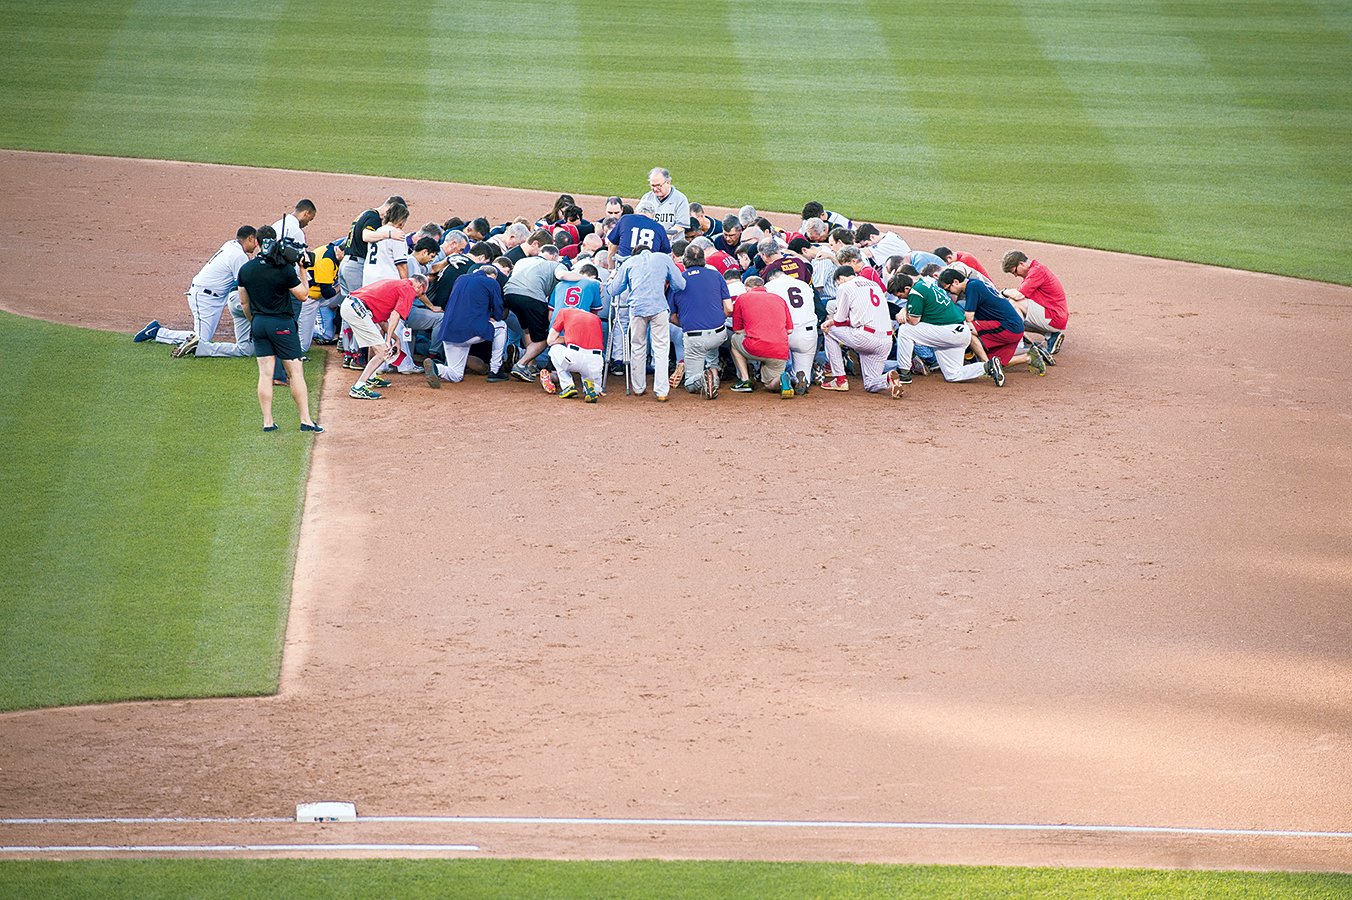 The next day, the game went on as planned, with players praying before the first pitch. Photograph Alex Wong/Getty Images.